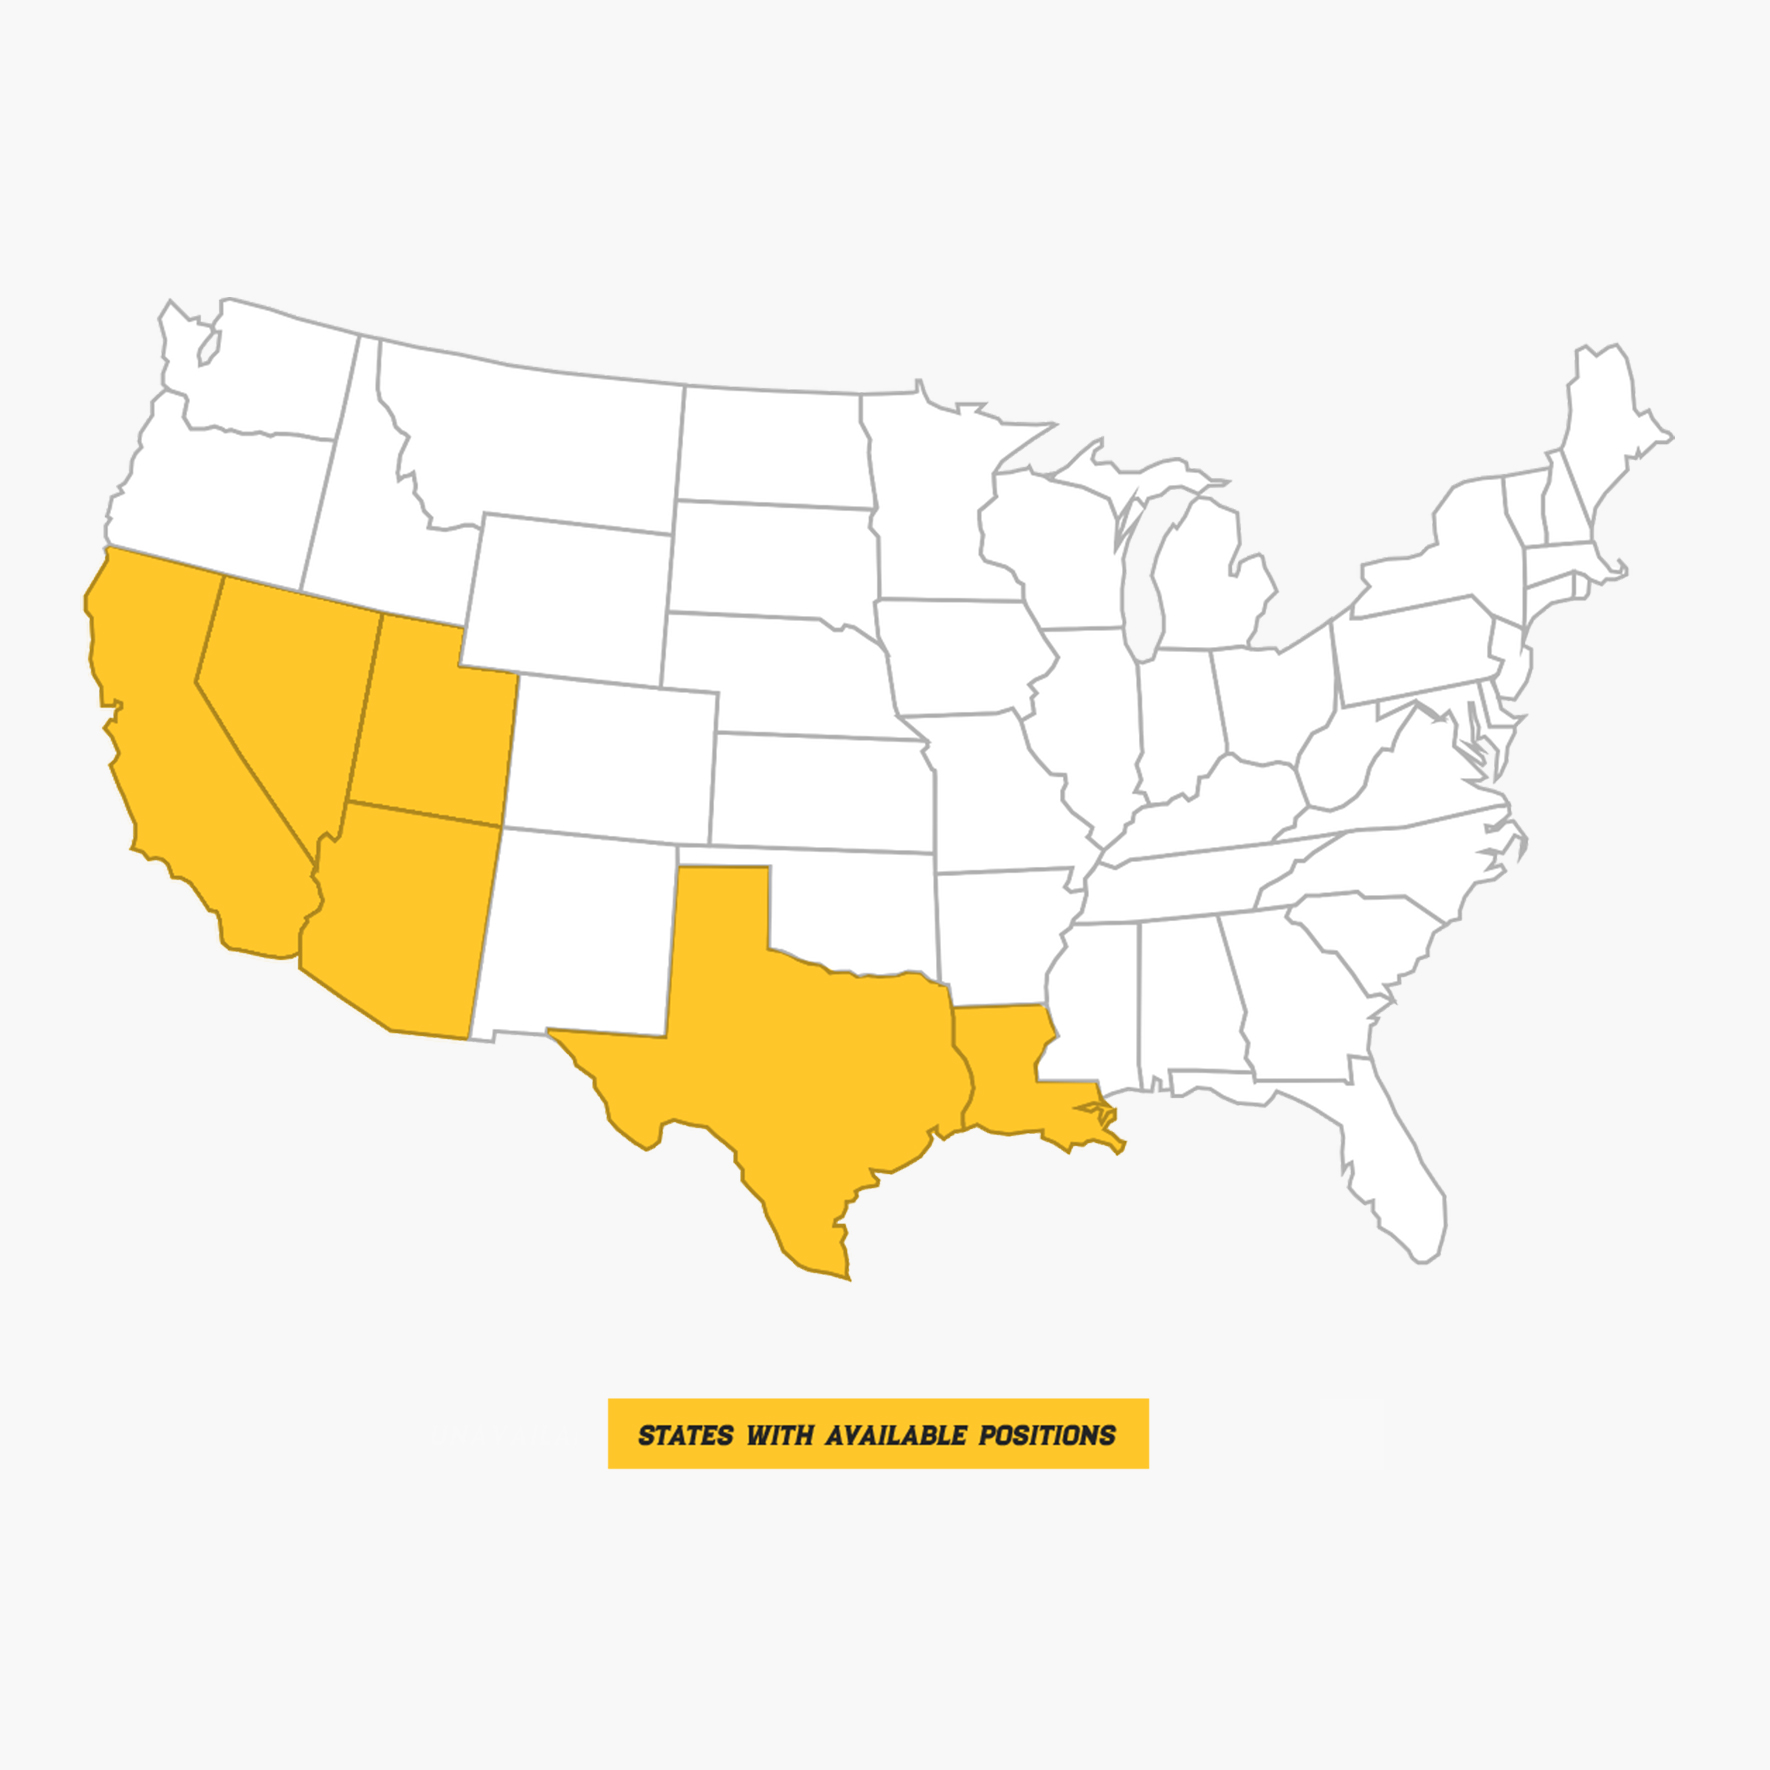 Map of US highlighting states with available El Pollo Loco positions